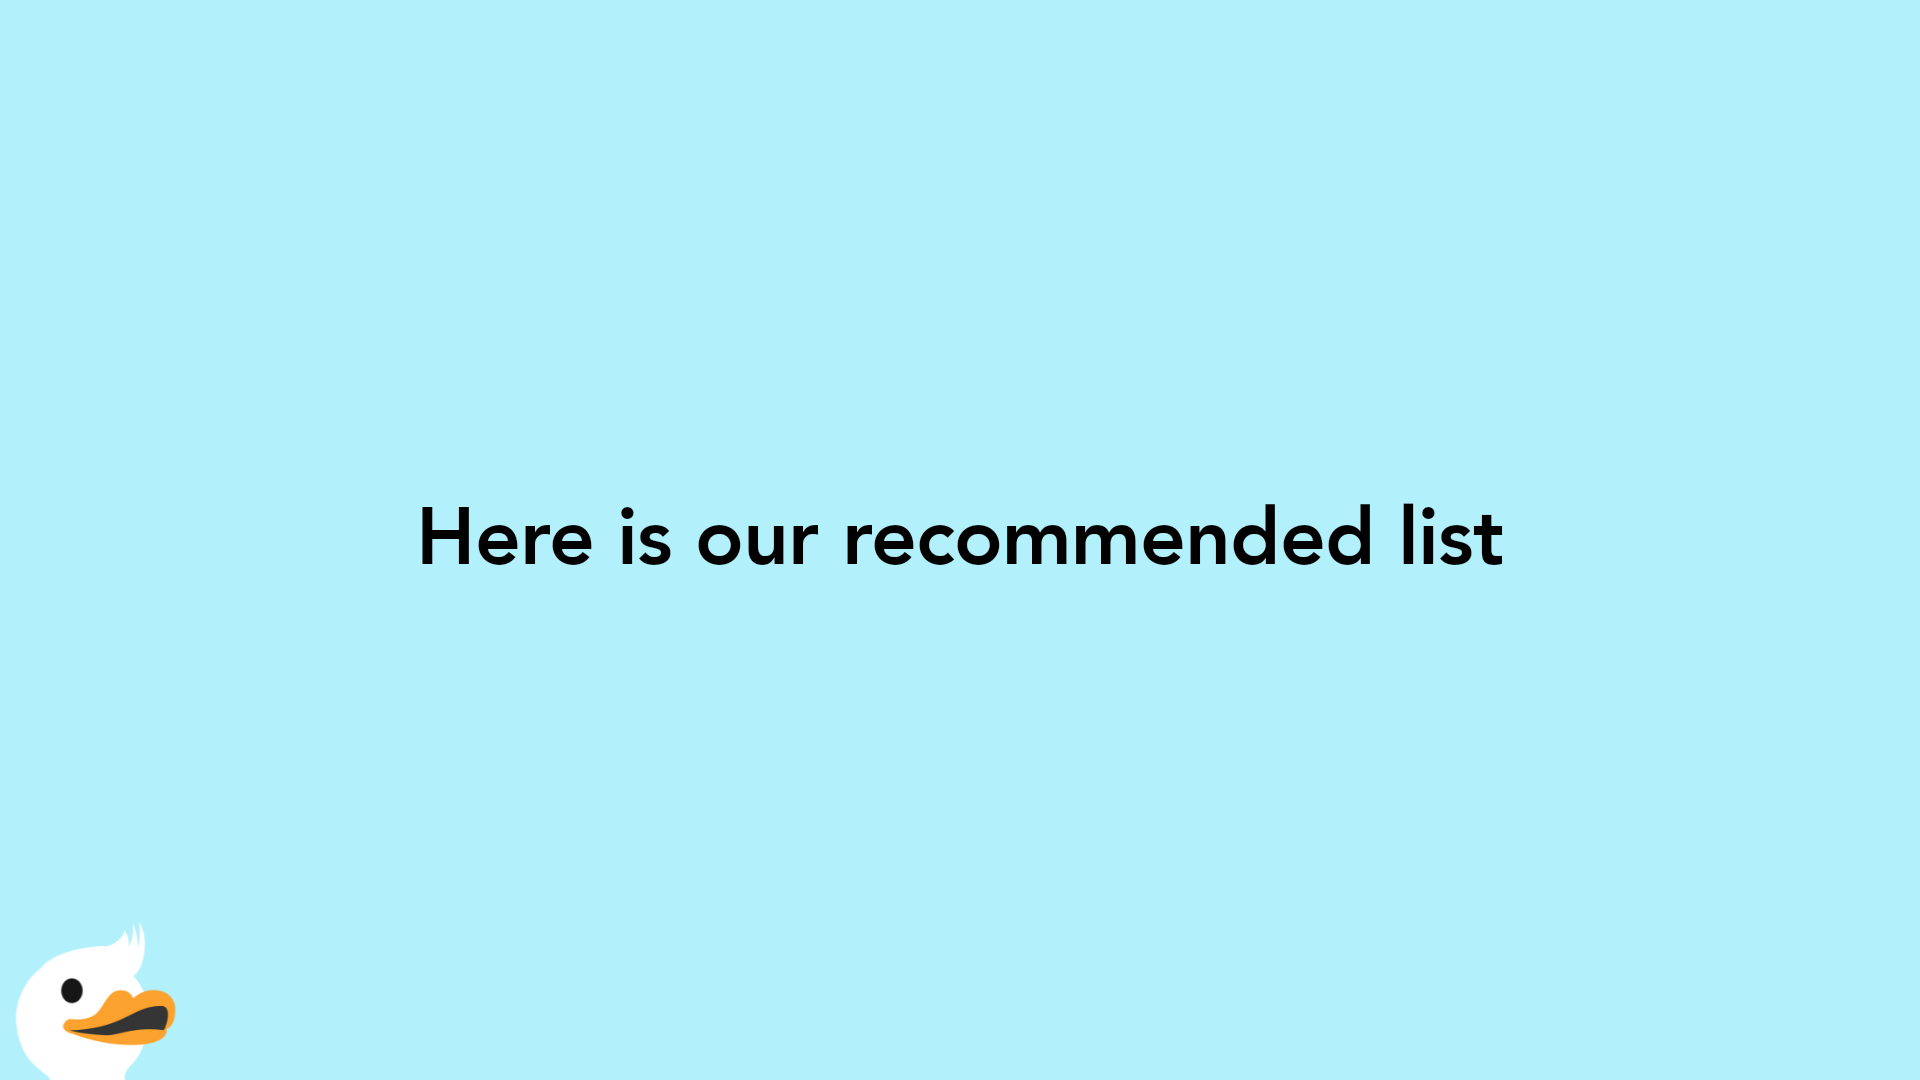 Here is our recommended list